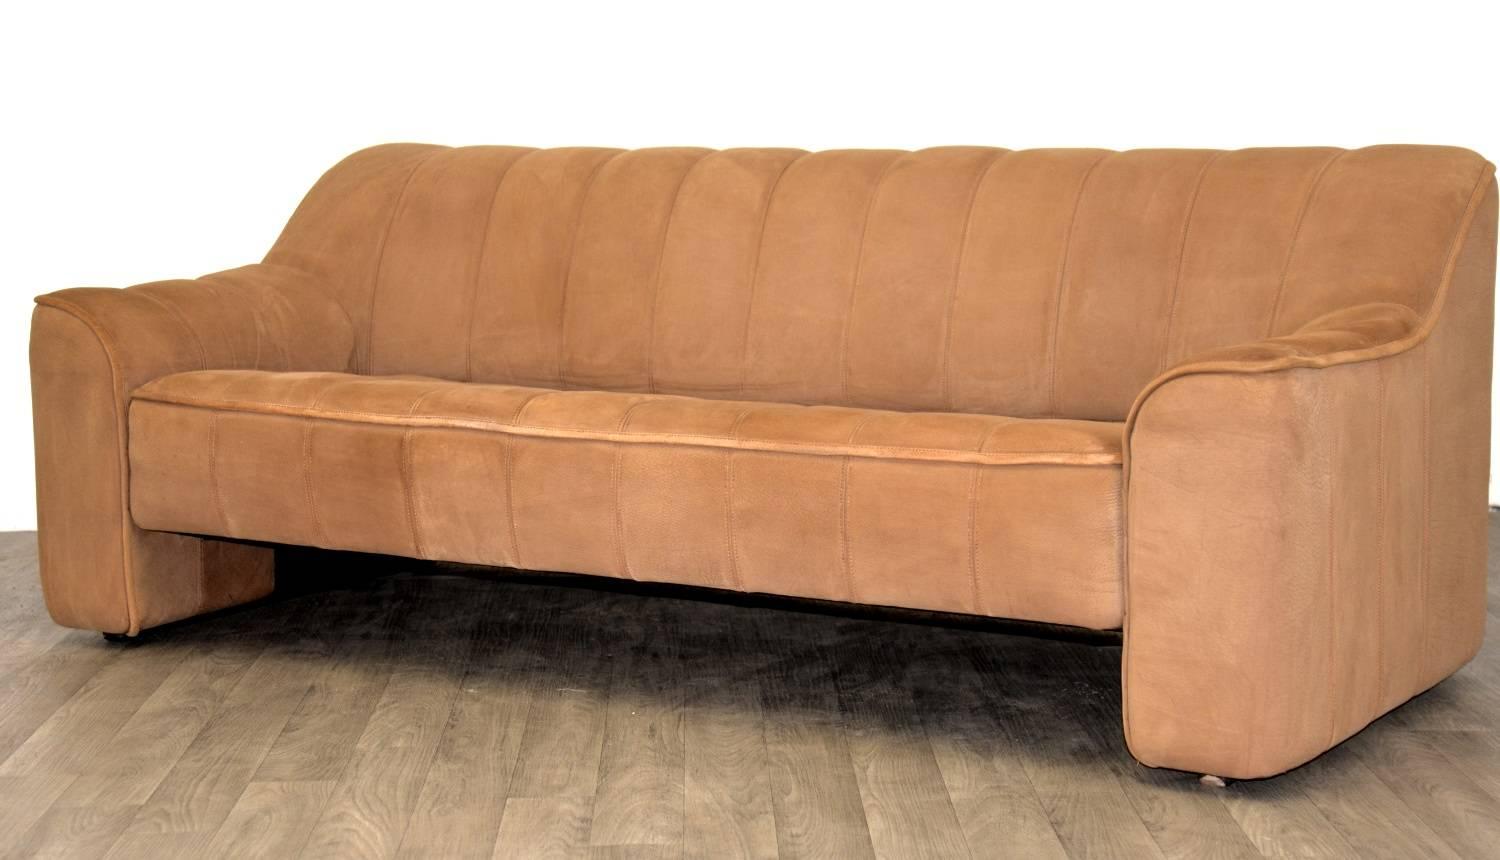 Discounted airfreight for our US and International customers (from 2 weeks door to door)

A matching pair of vintage De Sede DS 44 three-seat sofa and loveseat in thick buffalo leather with a texture similar to suede, soft and silky. Built circa